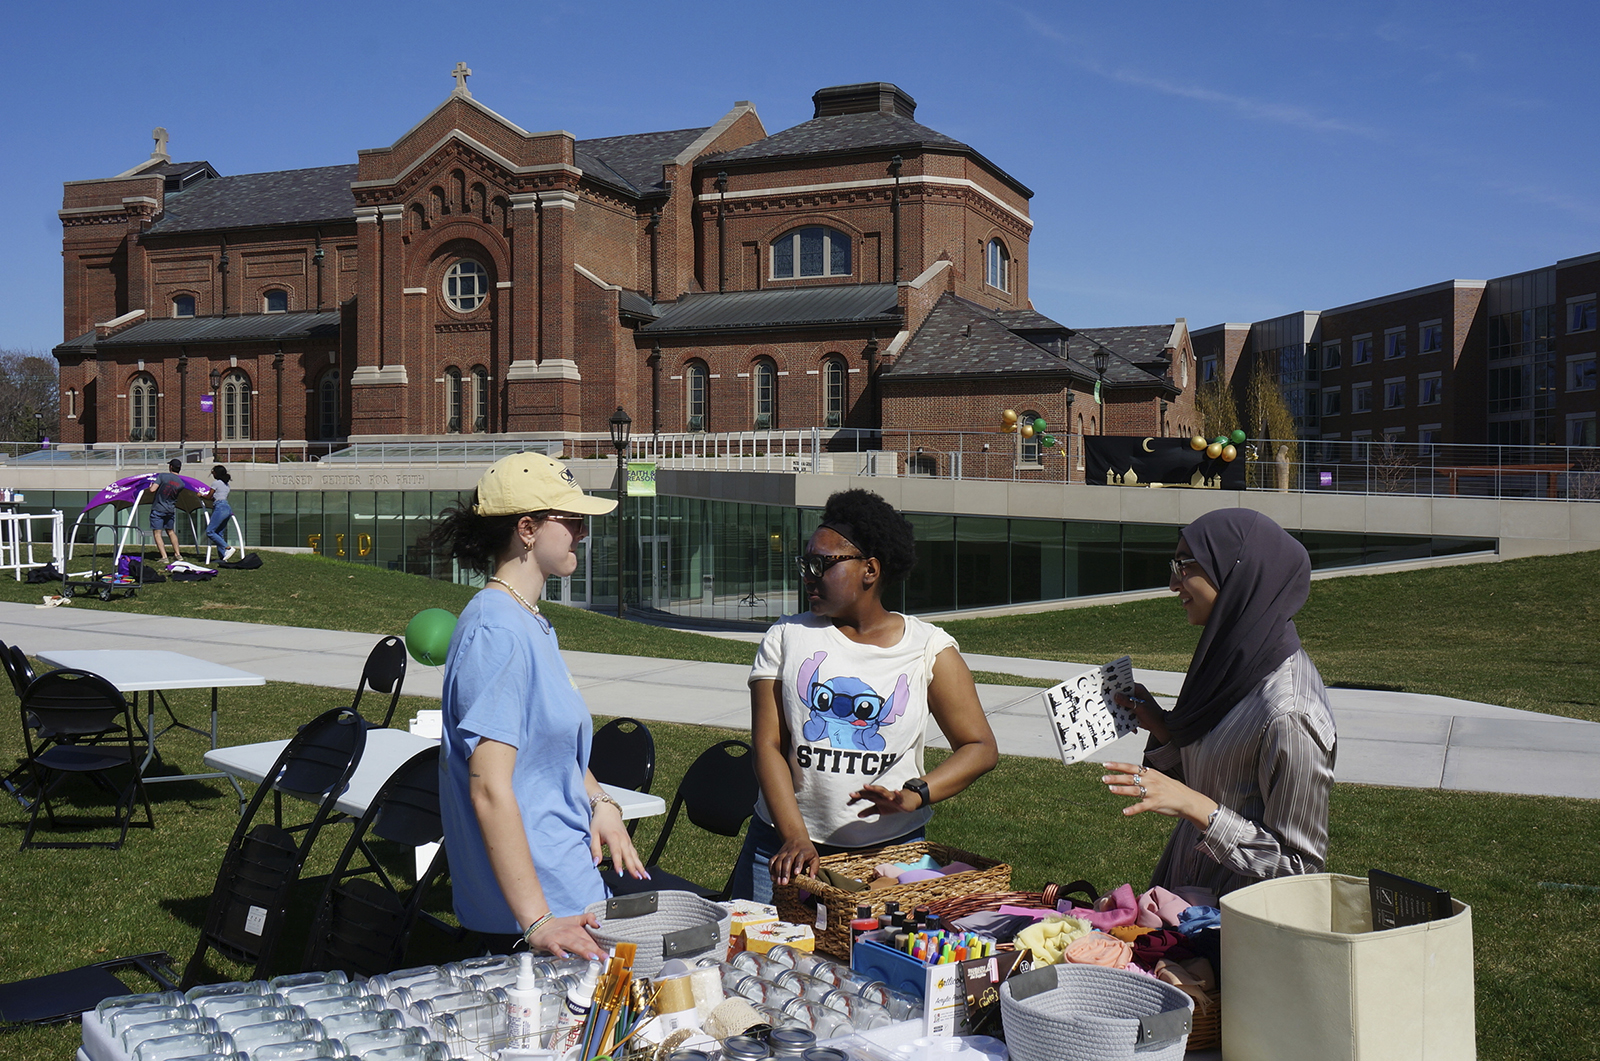 From left, University of St. Thomas students Helen Knudson, Arianna Norals, and Salma Nadir set up a table for decorating mason jars and headscarves at the school's celebration for the end of the Muslim holy month of Ramadan on the lawn in front of the Catholic chapel in St. Paul, Minn., on Saturday, May 7, 2022. Campus ministry helped organize the event, which included similar stress-reducing activities, as many faith leaders across US campuses seek ways to help students manage stress and anxiety. (AP Photo/Giovanna Dell'Orto)